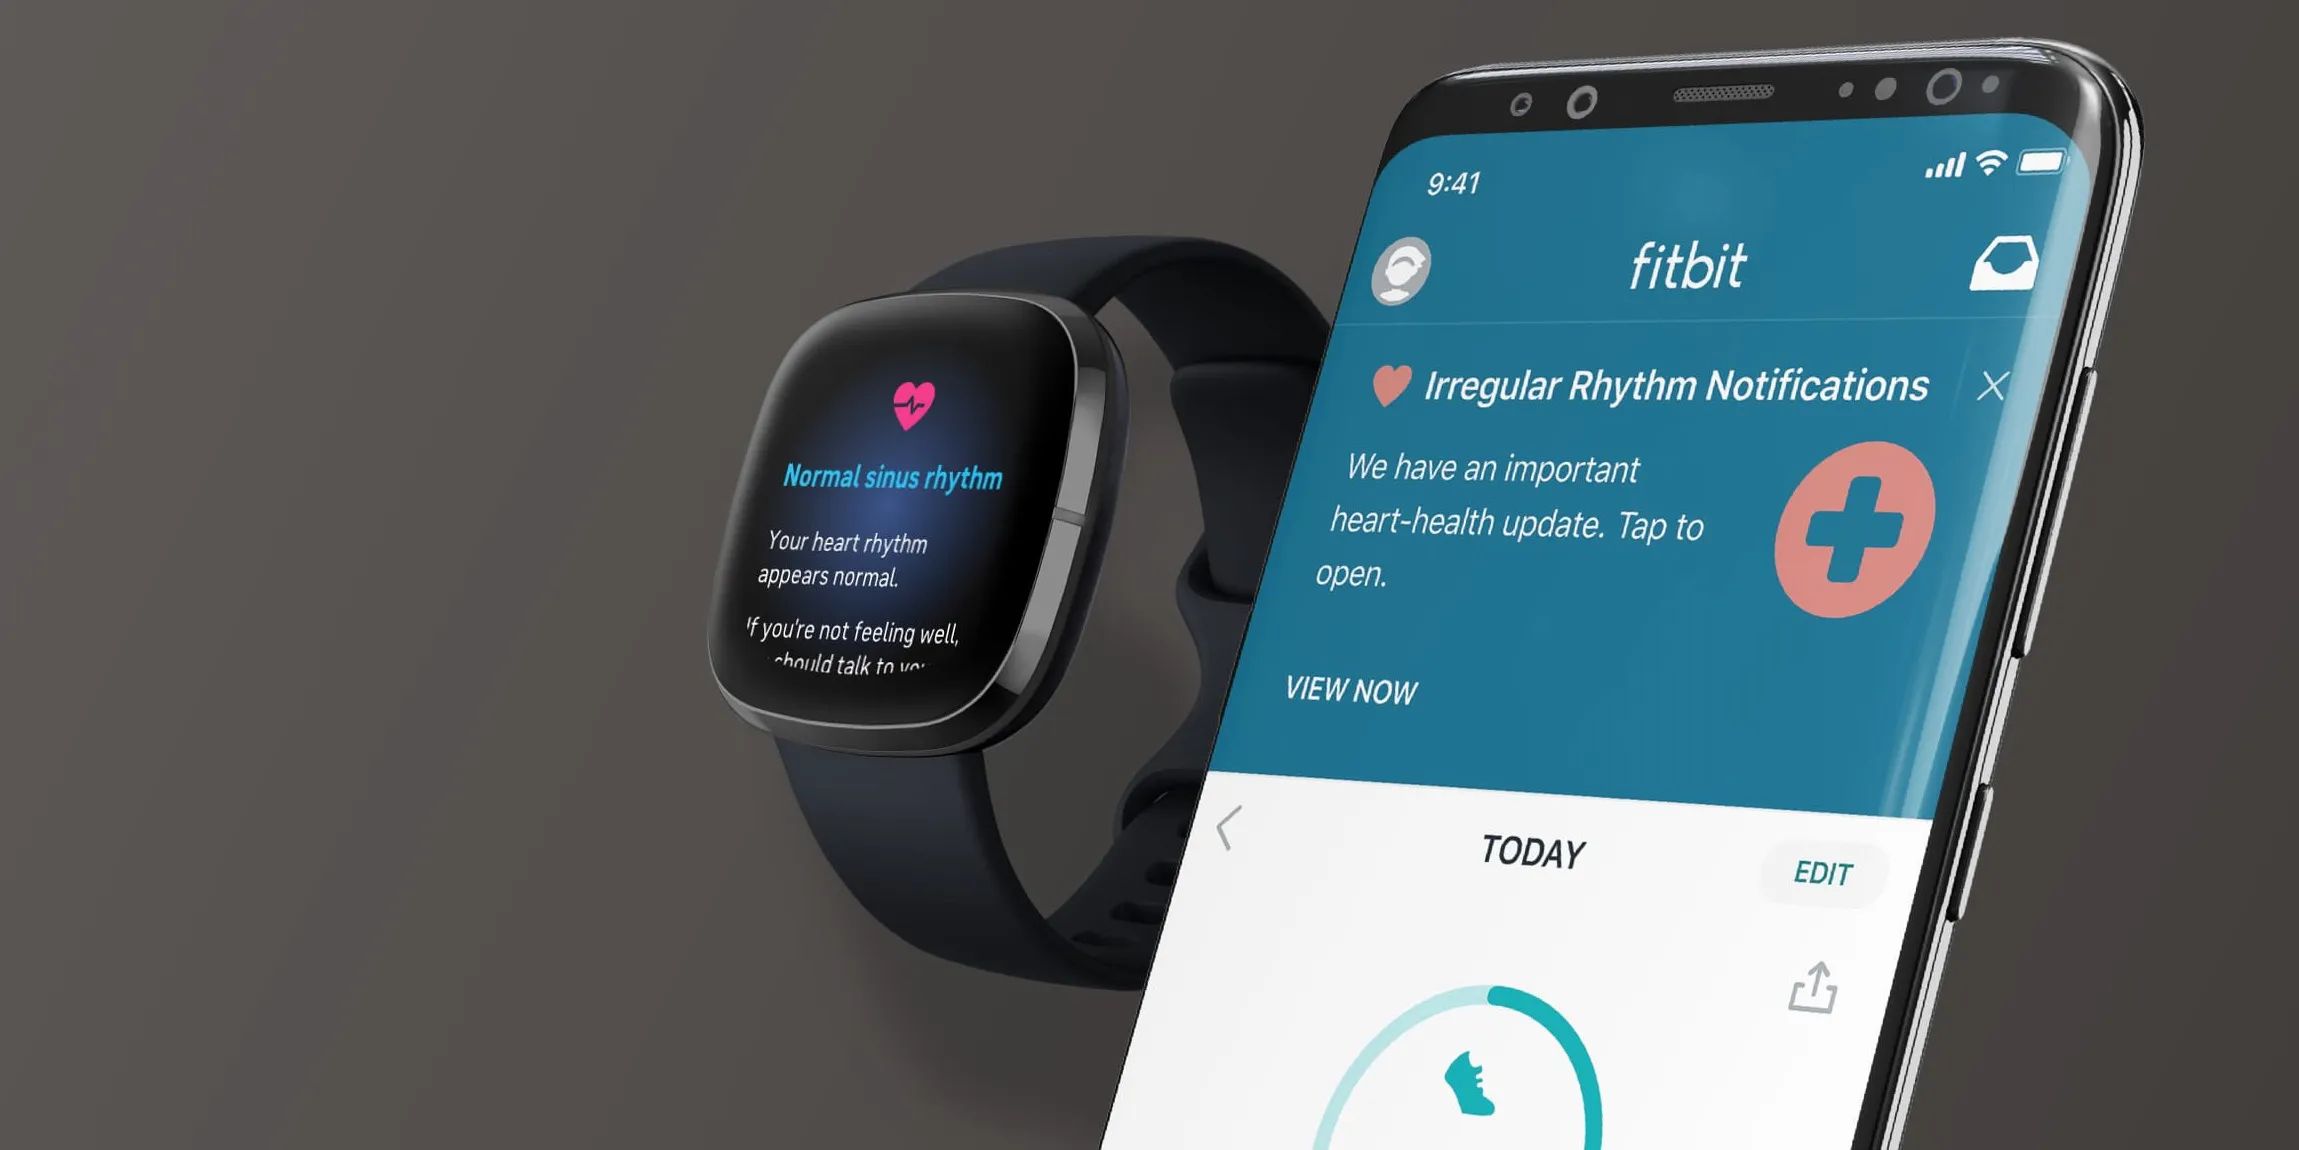 notification-nudge-troubleshooting-why-your-fitbit-is-not-providing-notifications